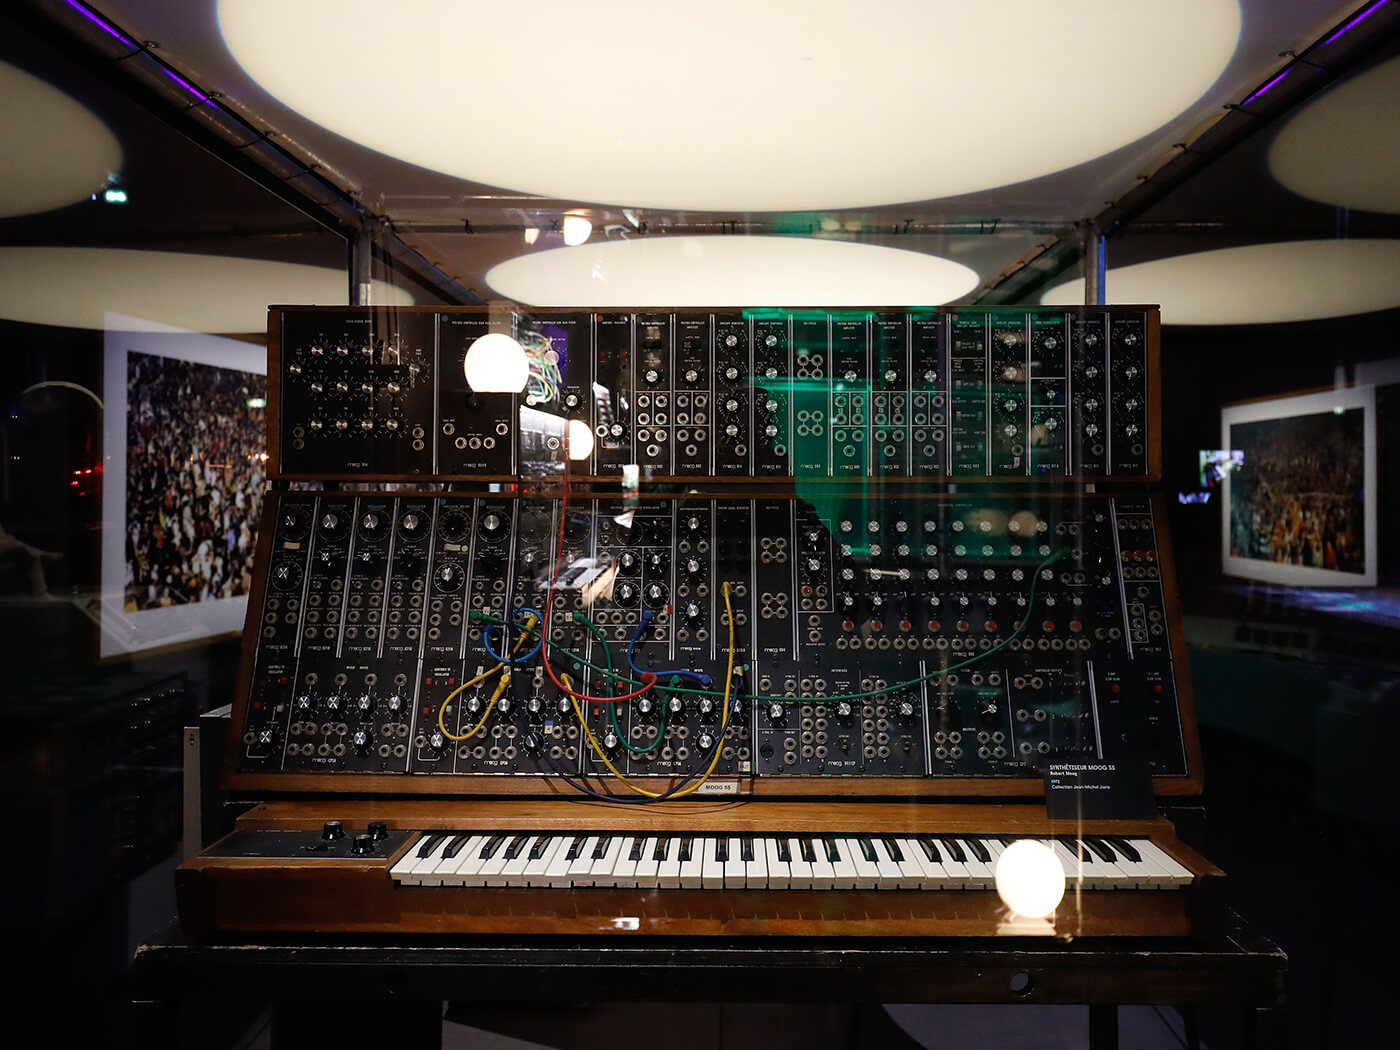 A Moog 55 synthesizer from 1972 on display at an exhibition, photo by Francois Guillot/AFP via Getty Images